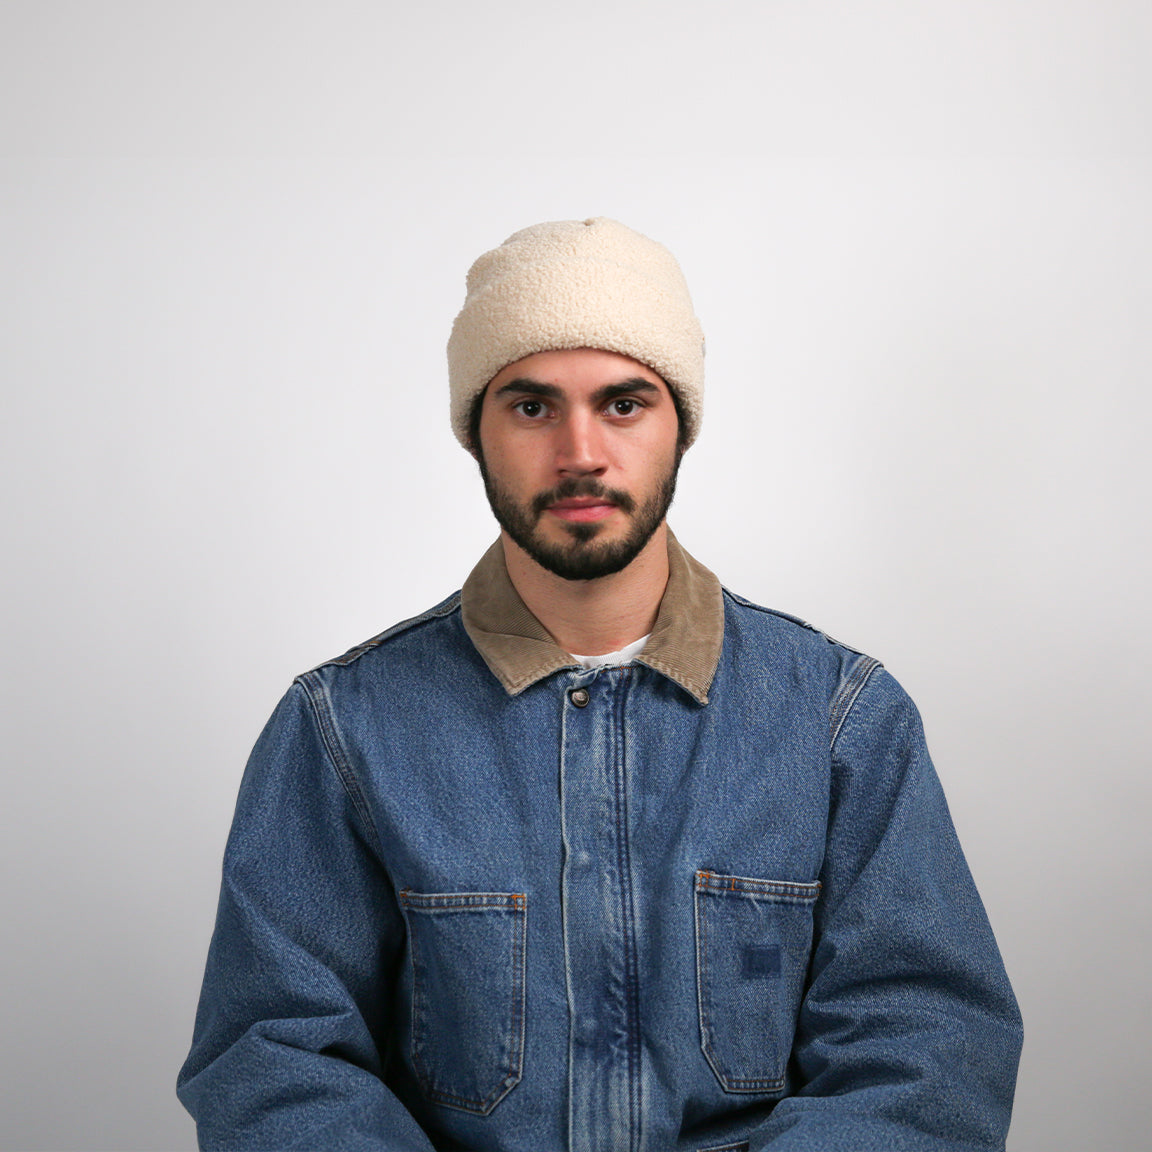 A person facing forward, wearing a cream-colored fleece beanie. The beanie is textured, soft to the touch, and has a rolled-up brim, which adds to the thickness around the head. The fit is relaxed, with a bit of room at the top, which gives it a slightly slouchy look. The person is dressed in a blue denim jacket with a contrasting tan collar.